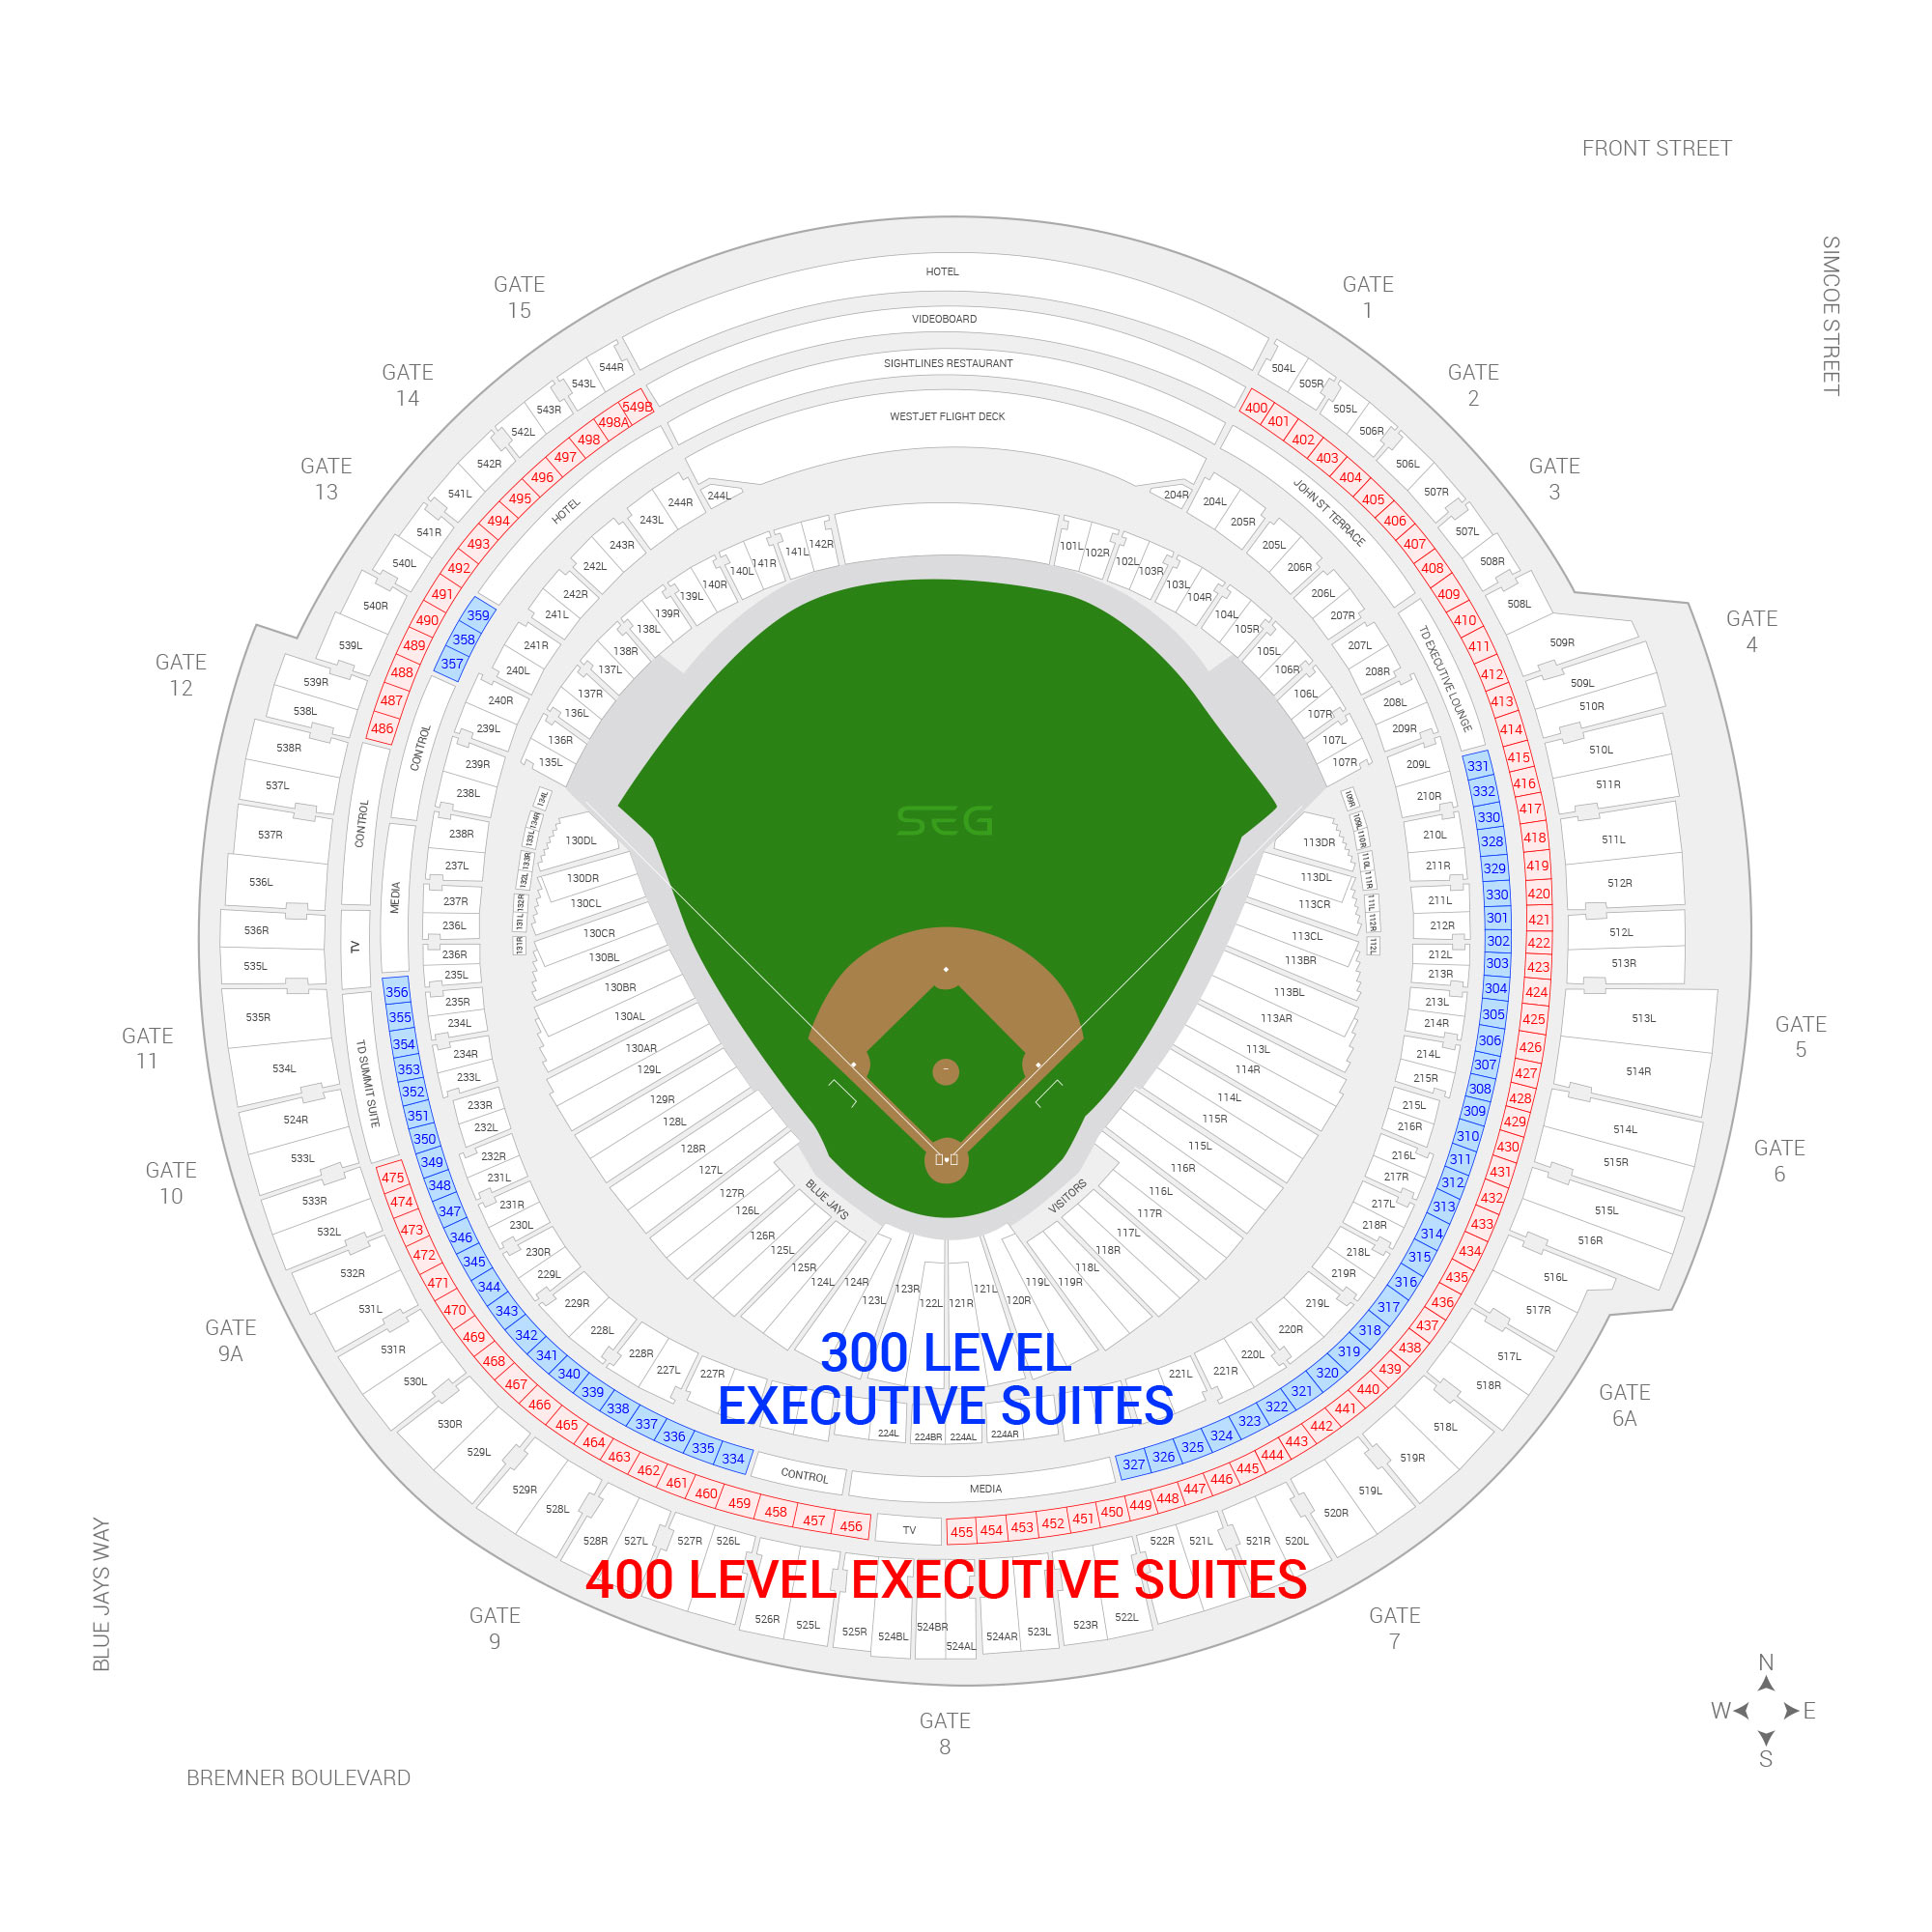 Rogers Centre / Toronto Blue Jays Suite Map and Seating Chart